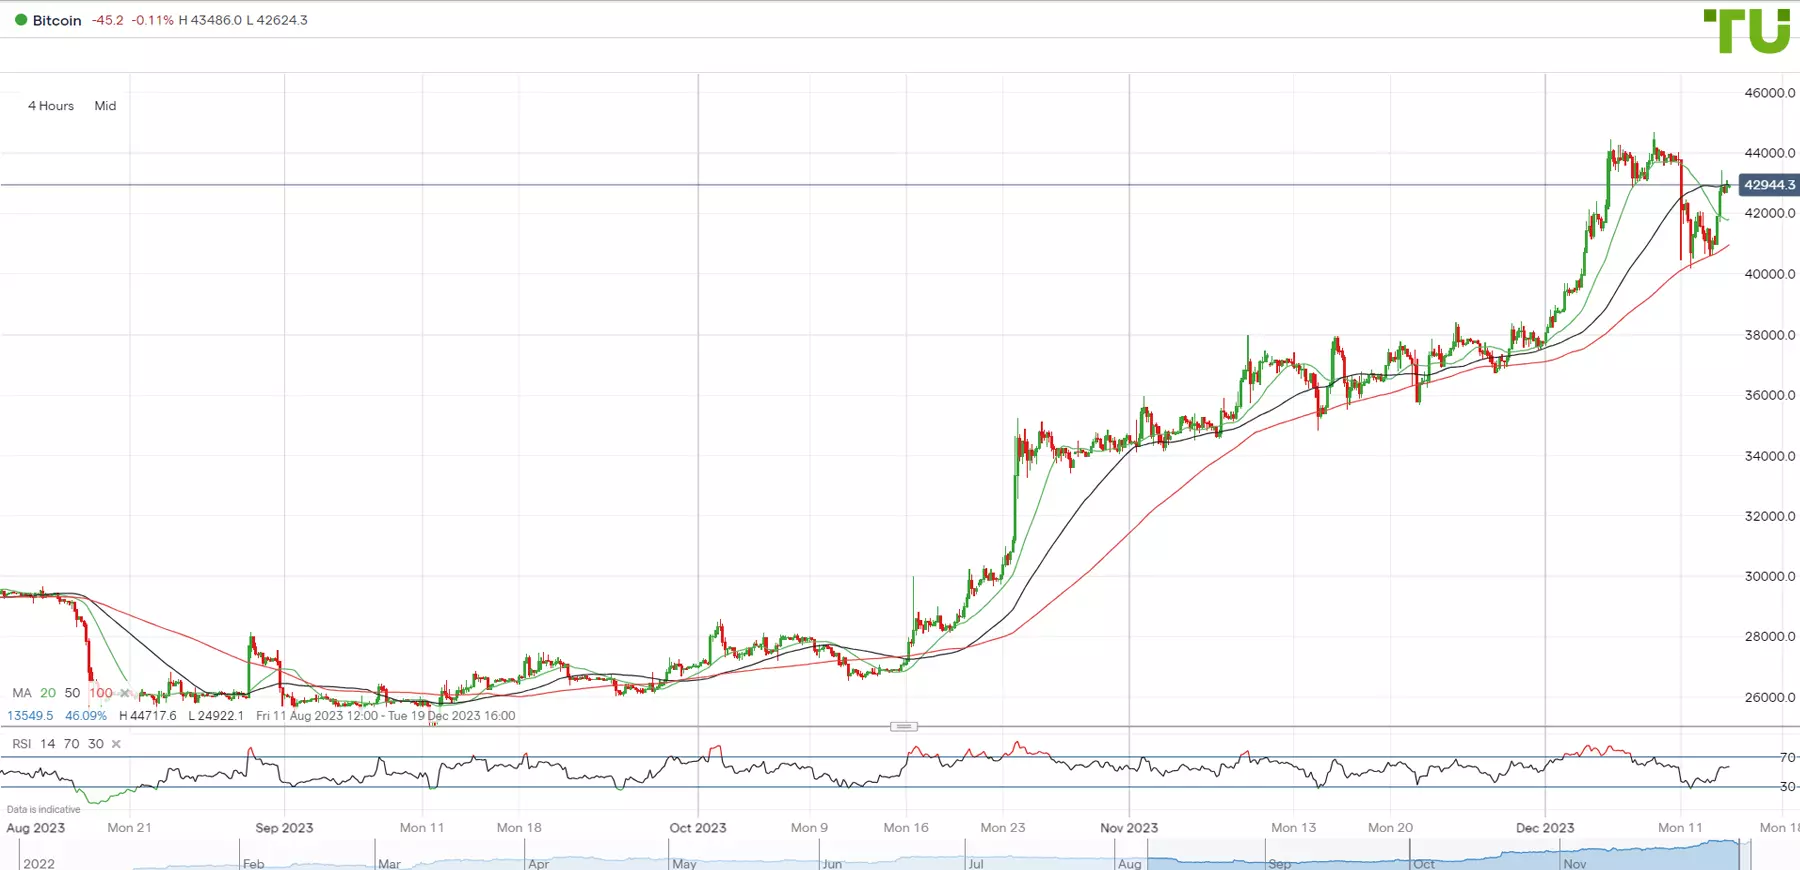 BTC/USD went up on the Fed's decision